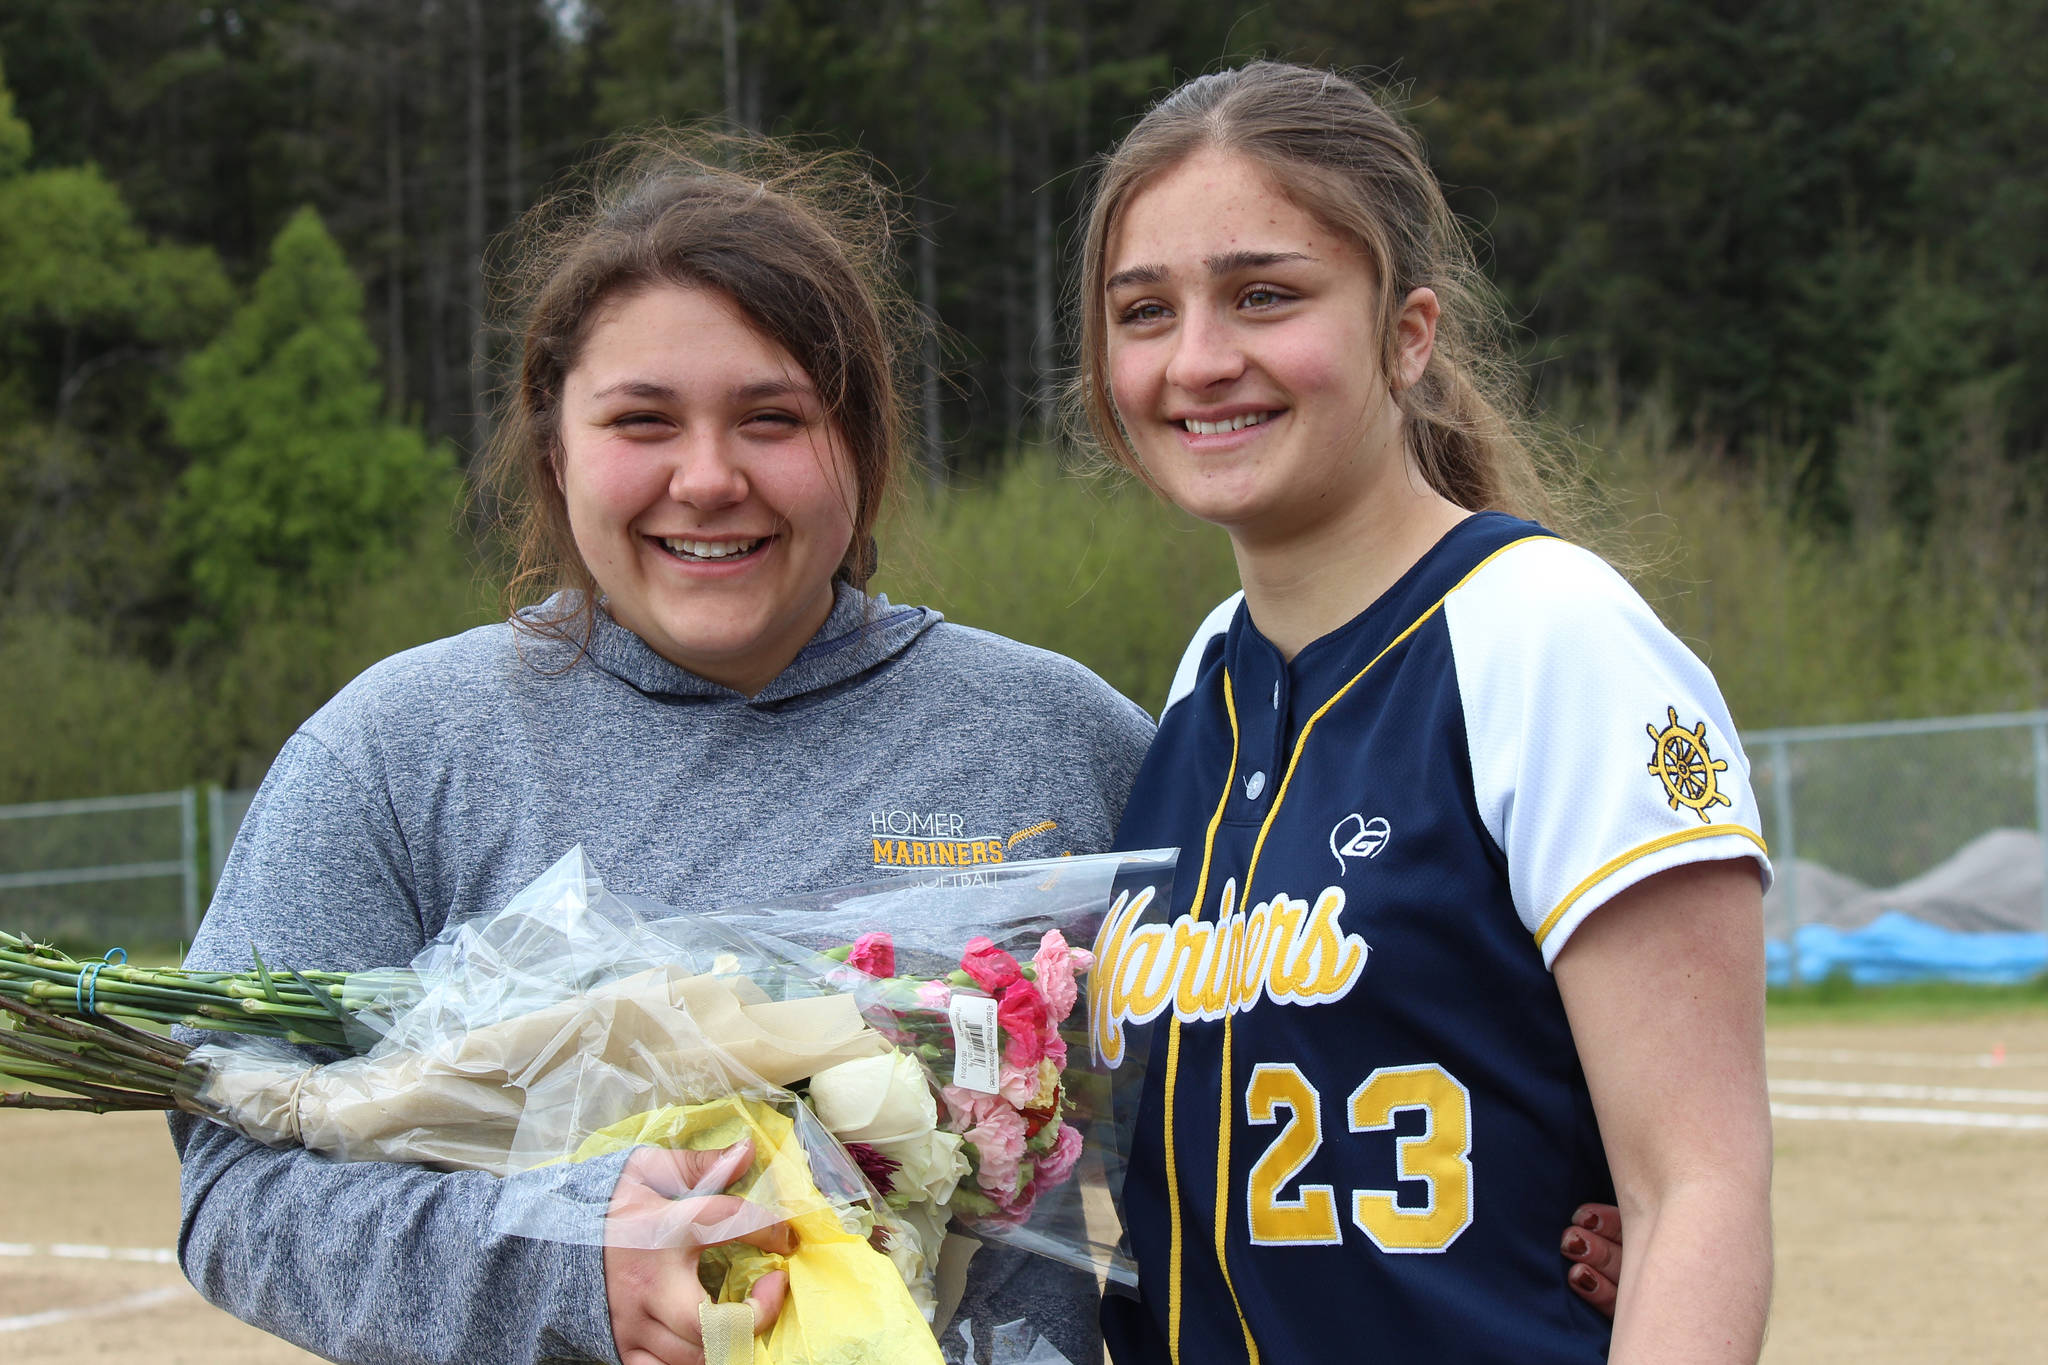 Senior Brianna Hetrick, left, and foreign exchange student Claudia Fernandez, right, were honored prior to the Mariners’ softball game against Kenai at the Jack Gist field on Saturday. (Photo by McKIbben Jackinsky )